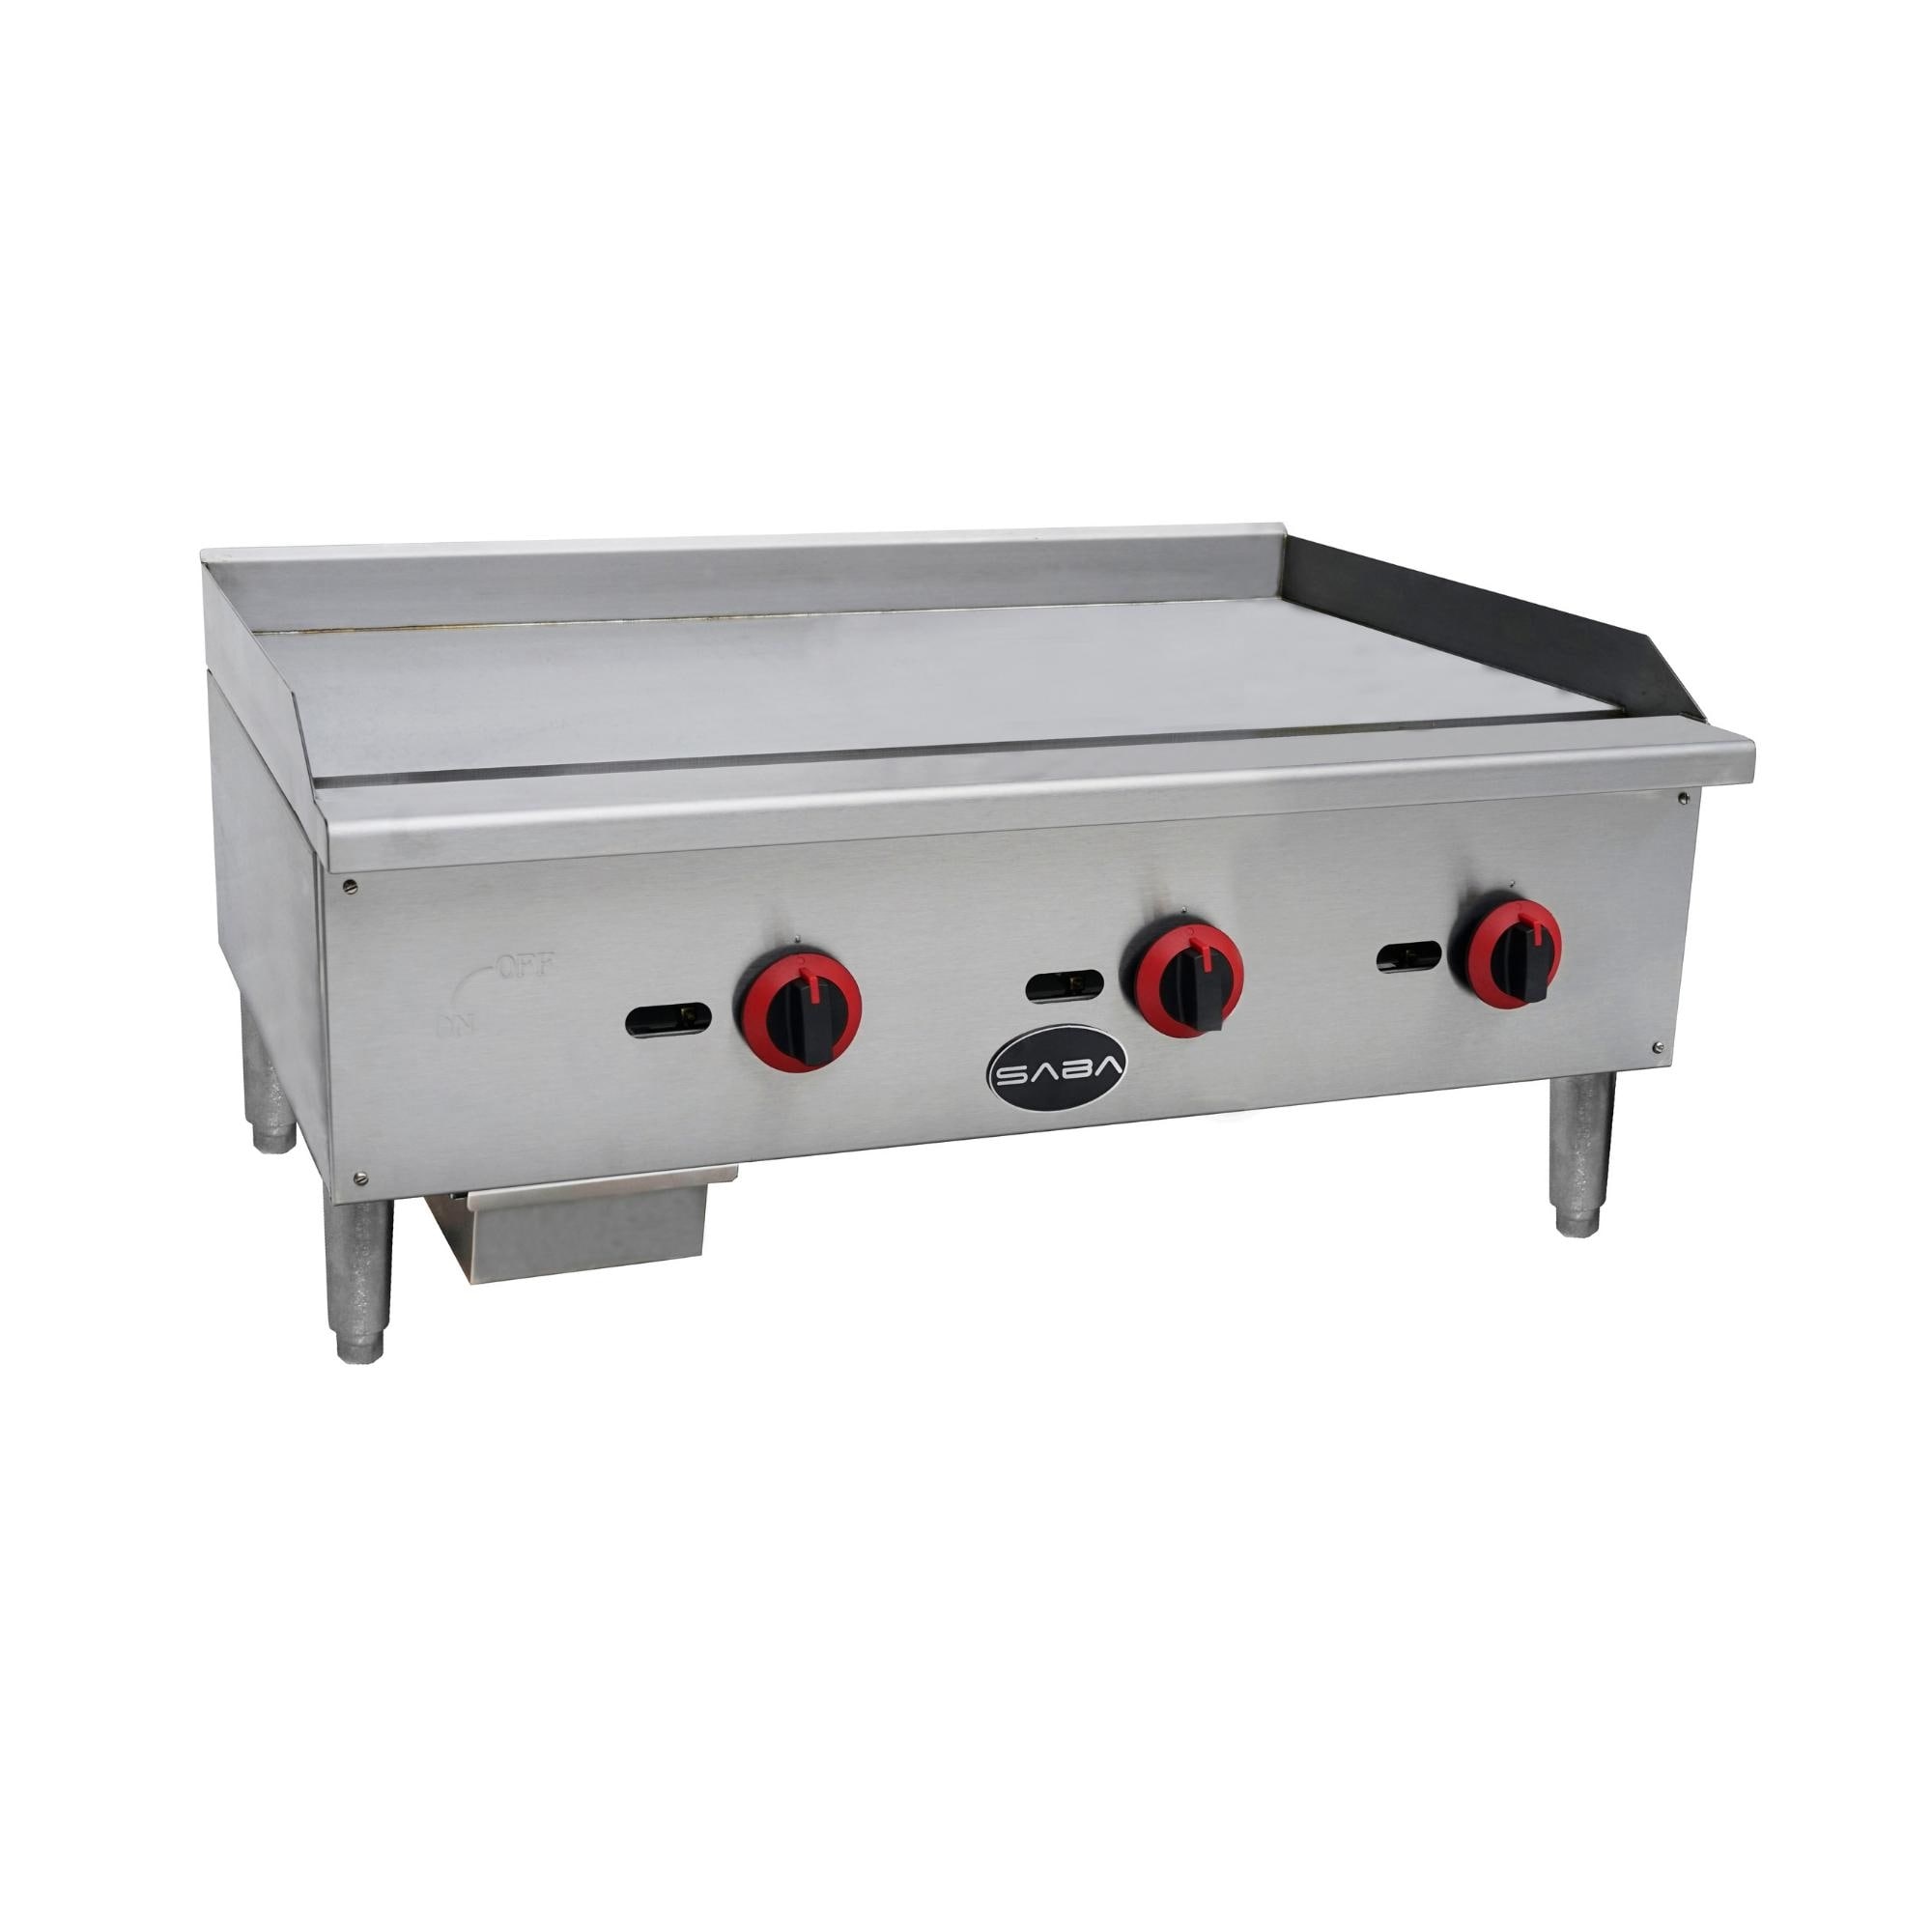 https://ak1.ostkcdn.com/images/products/is/images/direct/afe5b899dd72fe910ce9868ec7c9b4a11320eb0c/SABA-MG-36---Commercial-Manual-Griddle.jpg